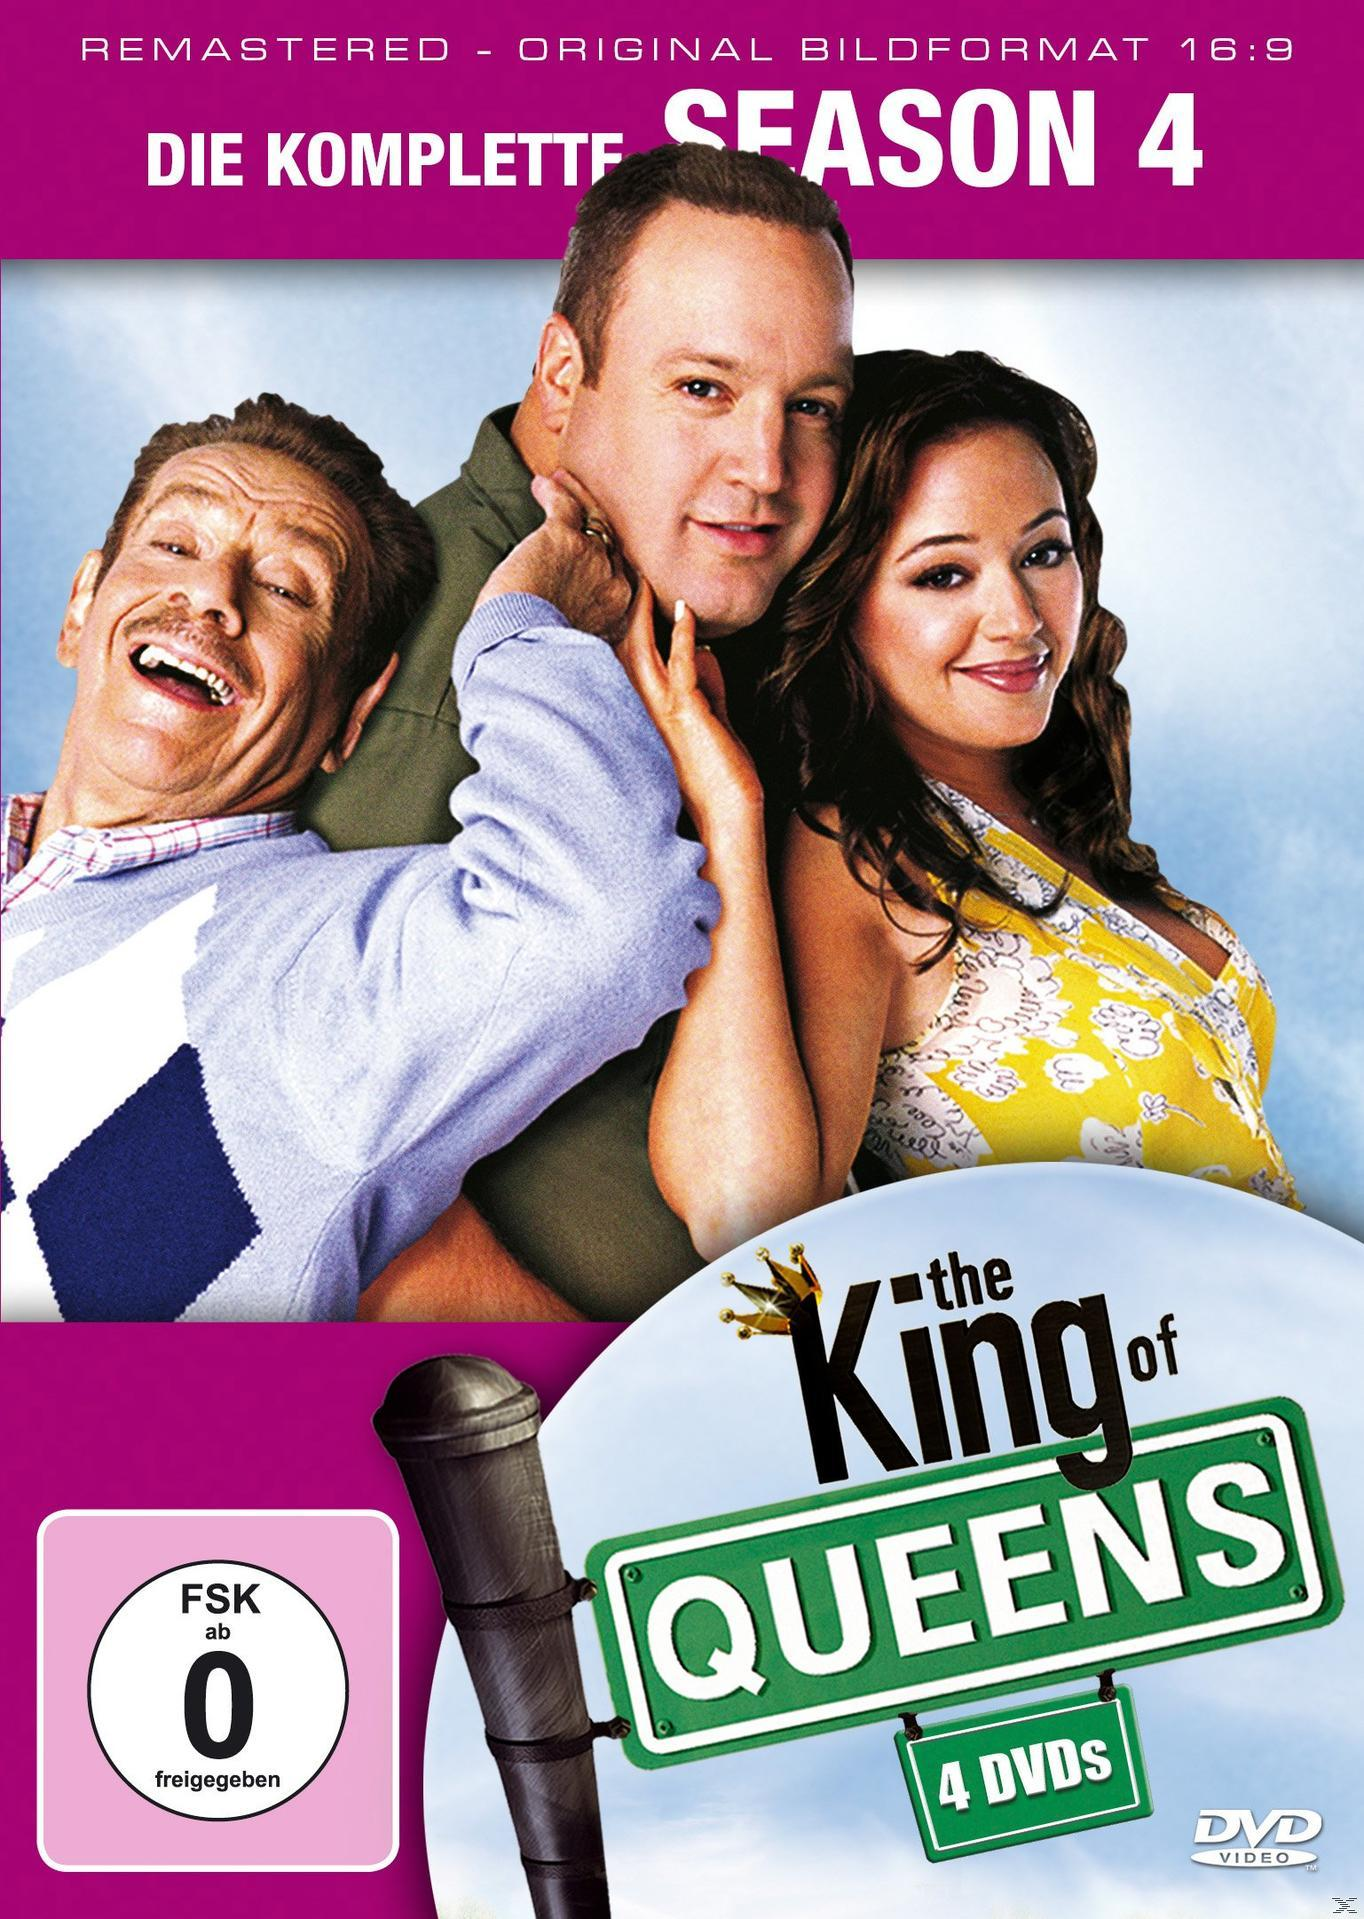 4 Queens King - The Staffel of DVD